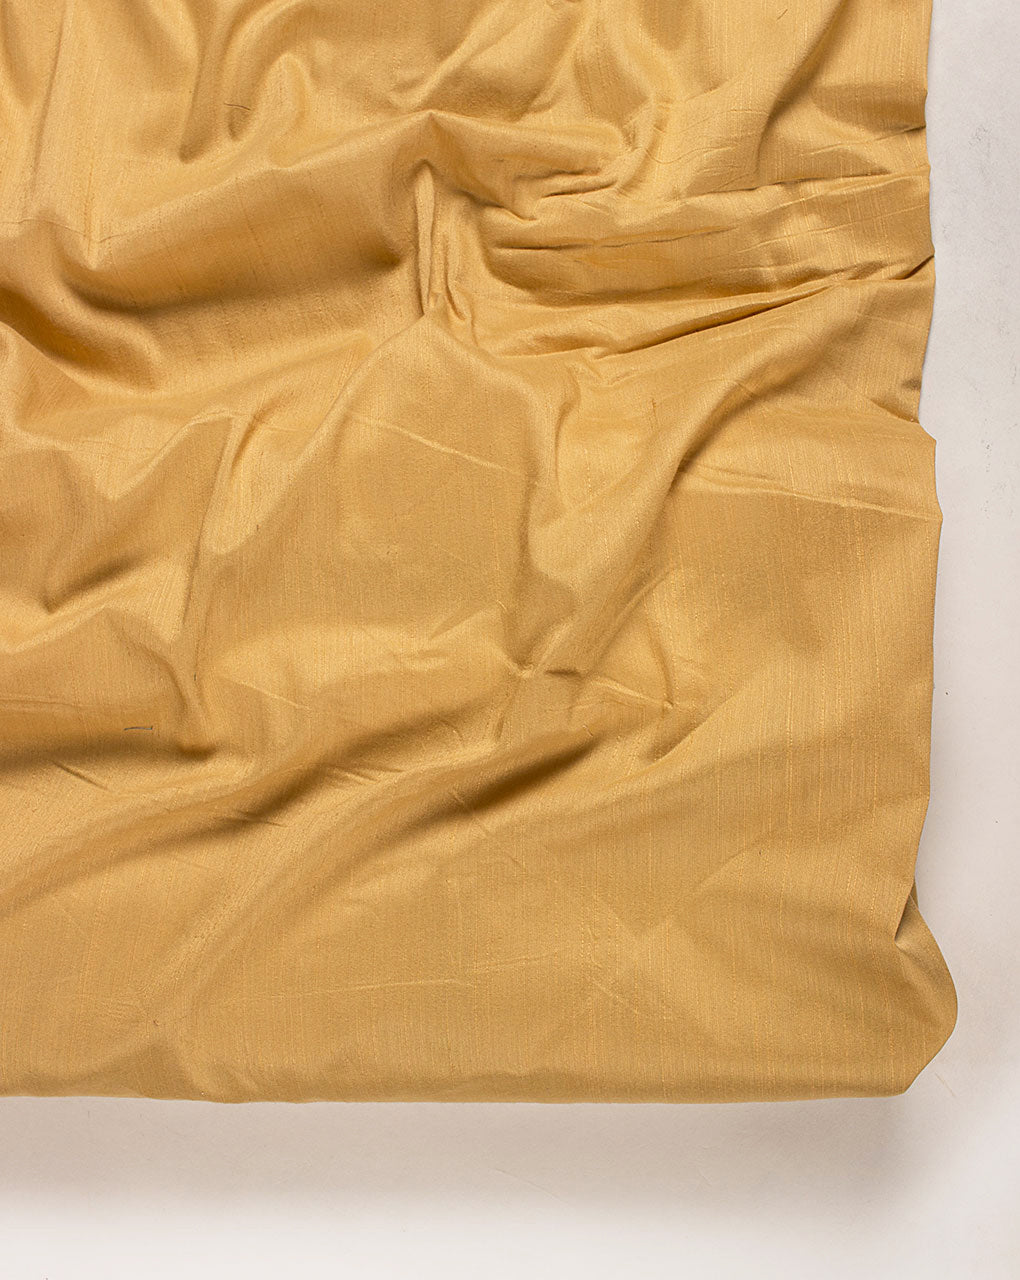 Beige Woven Poly Viscose Fabric